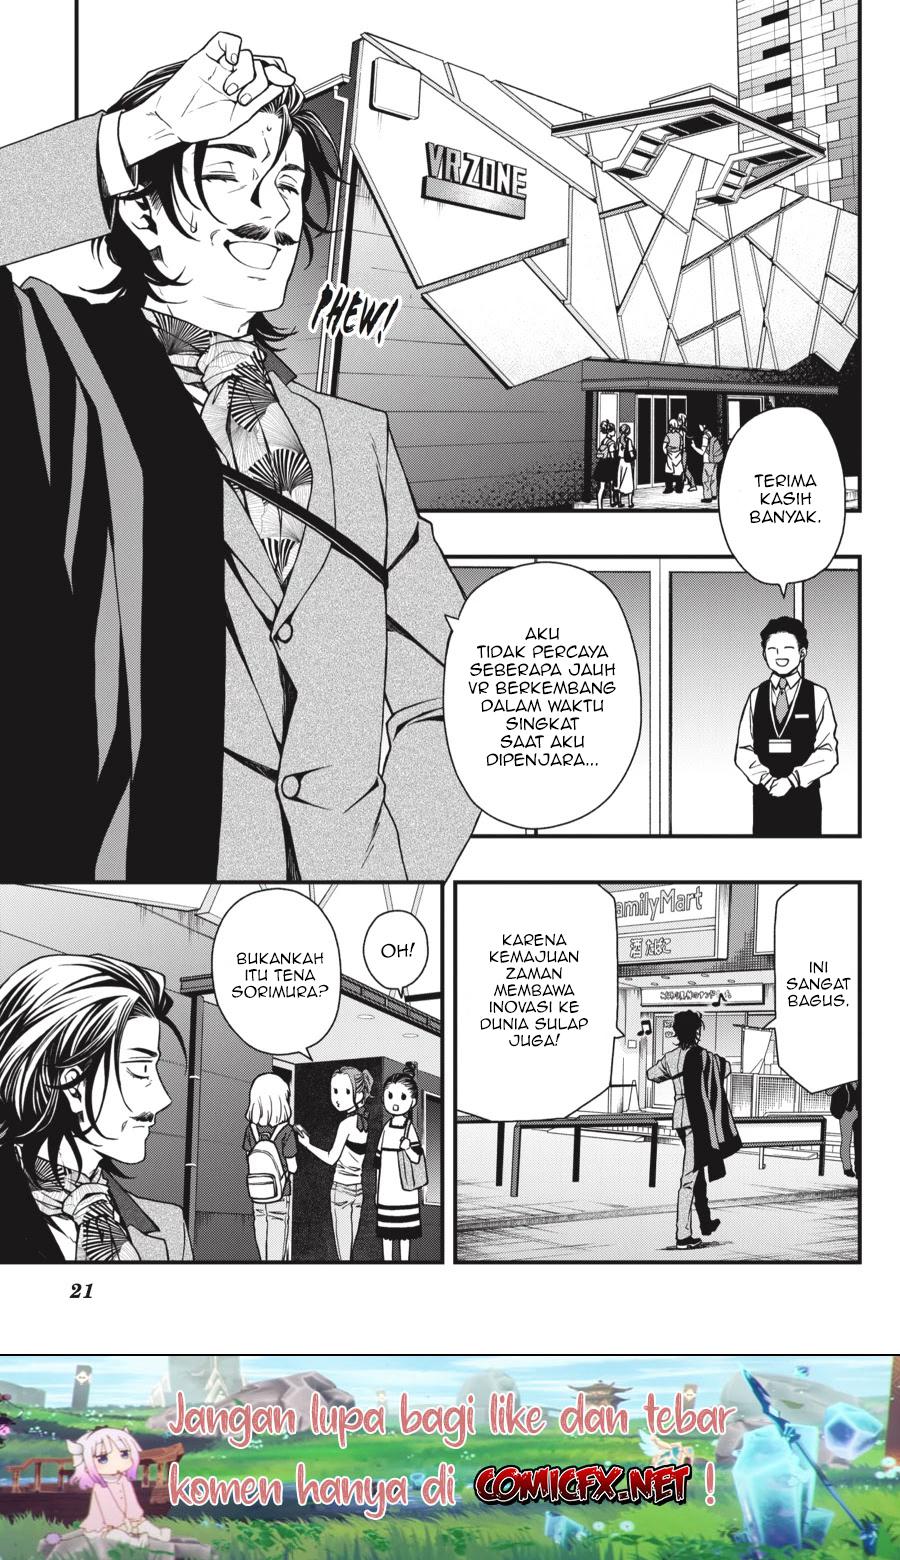 Dead Mount Death Play Chapter 22 Bahasa Indonesia